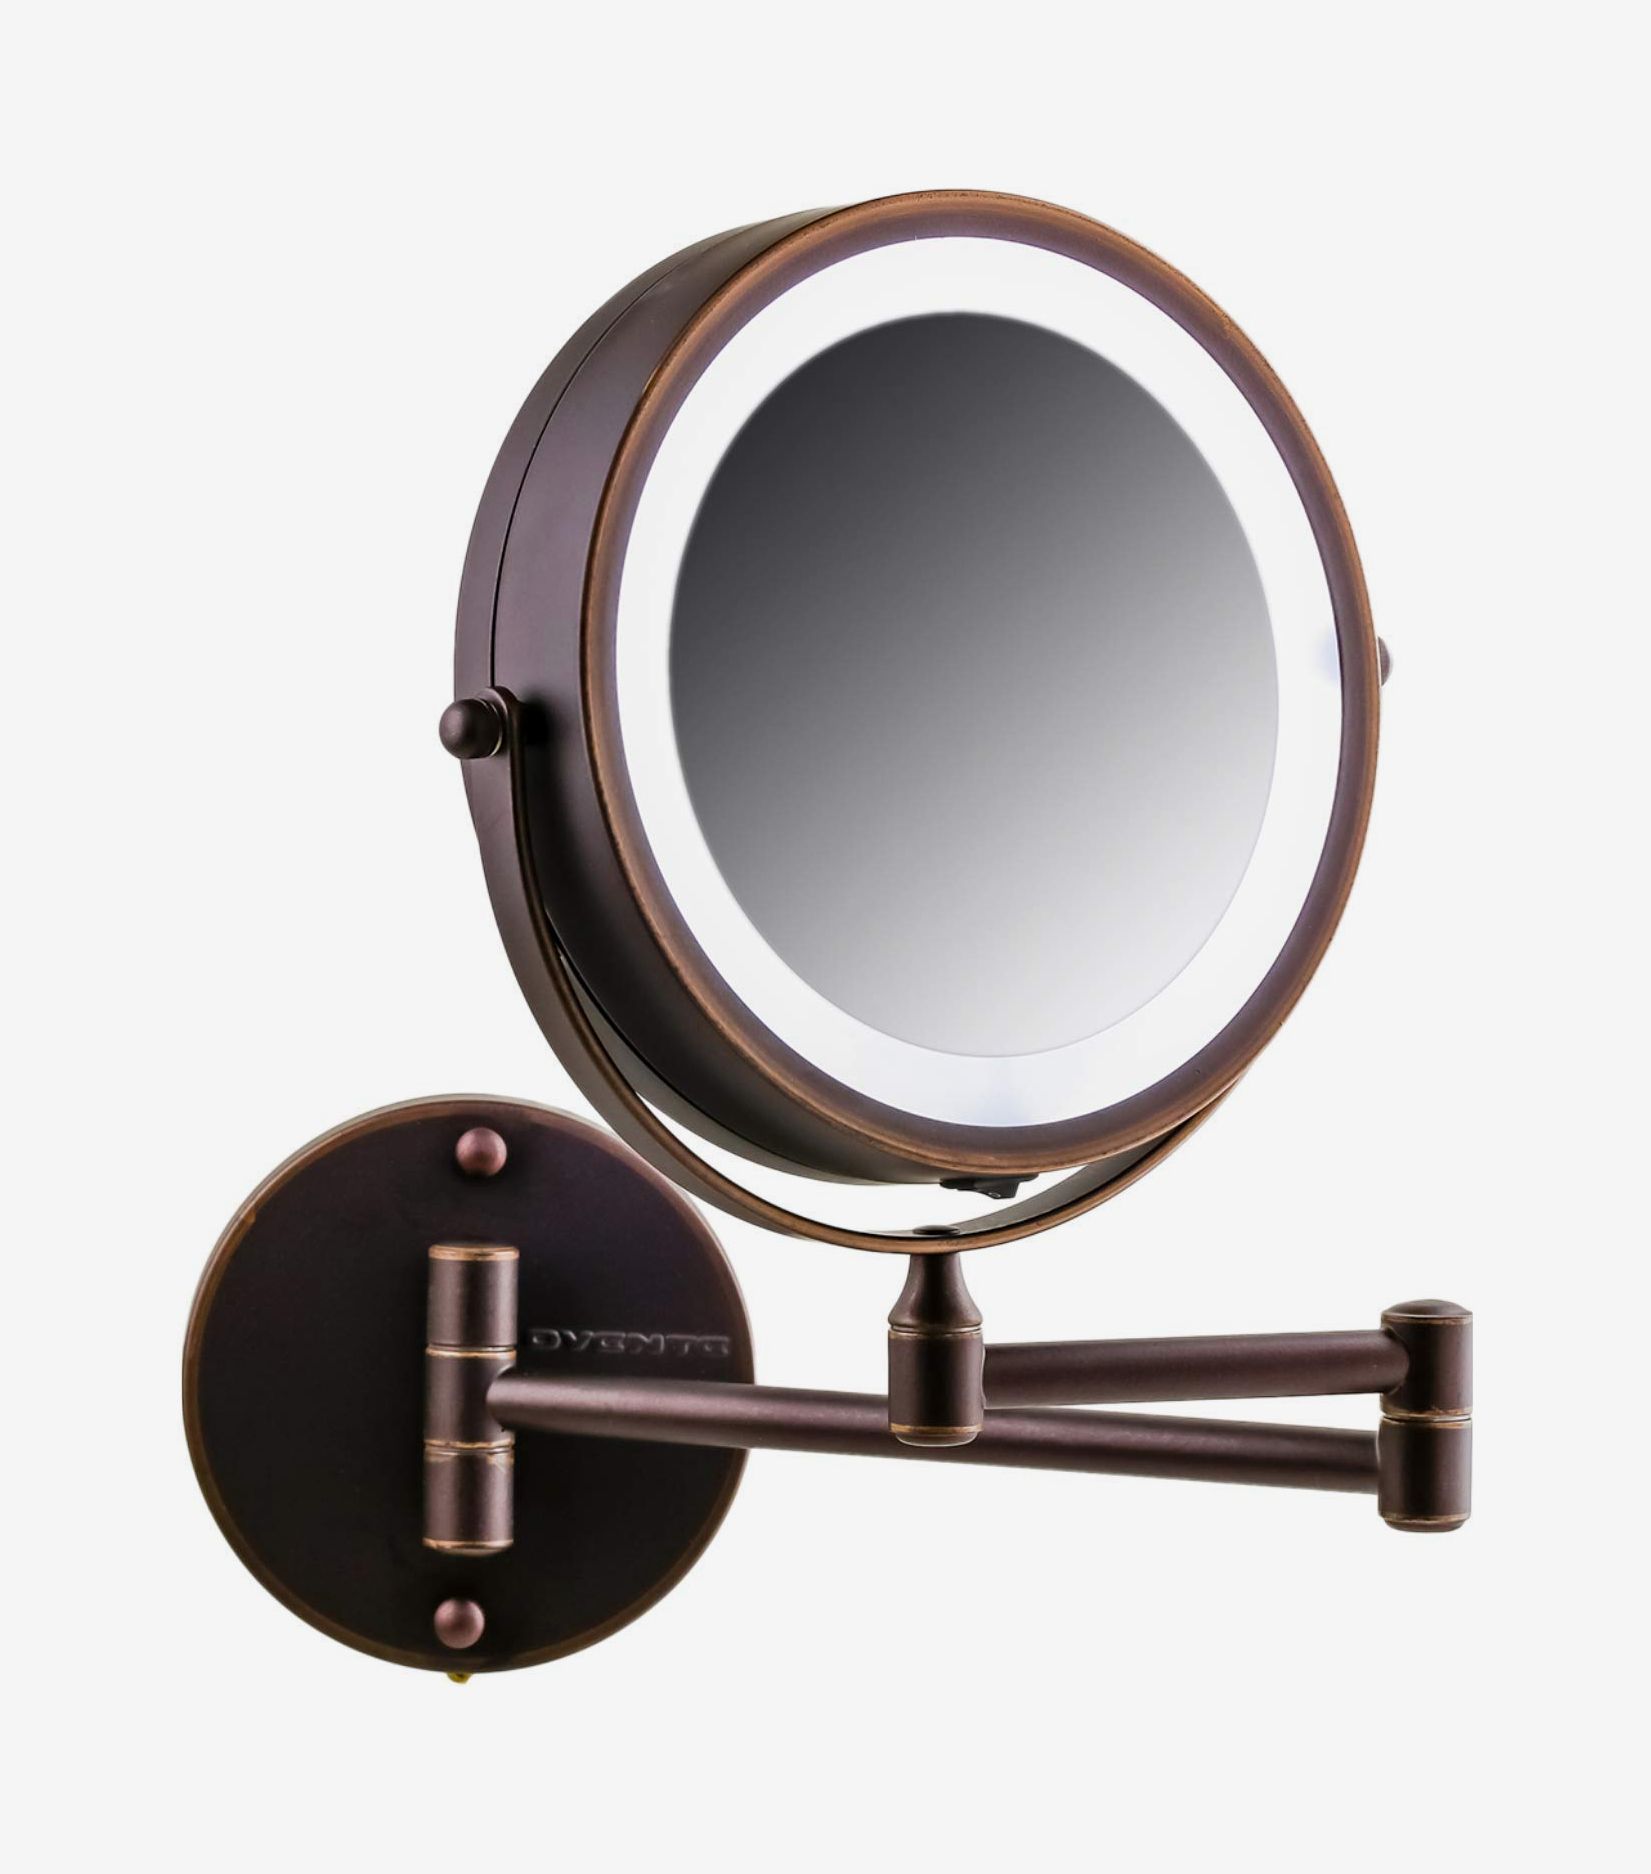 14 Best Lighted Makeup Mirrors 2022, Magnifying Mirrors For Makeup Uk